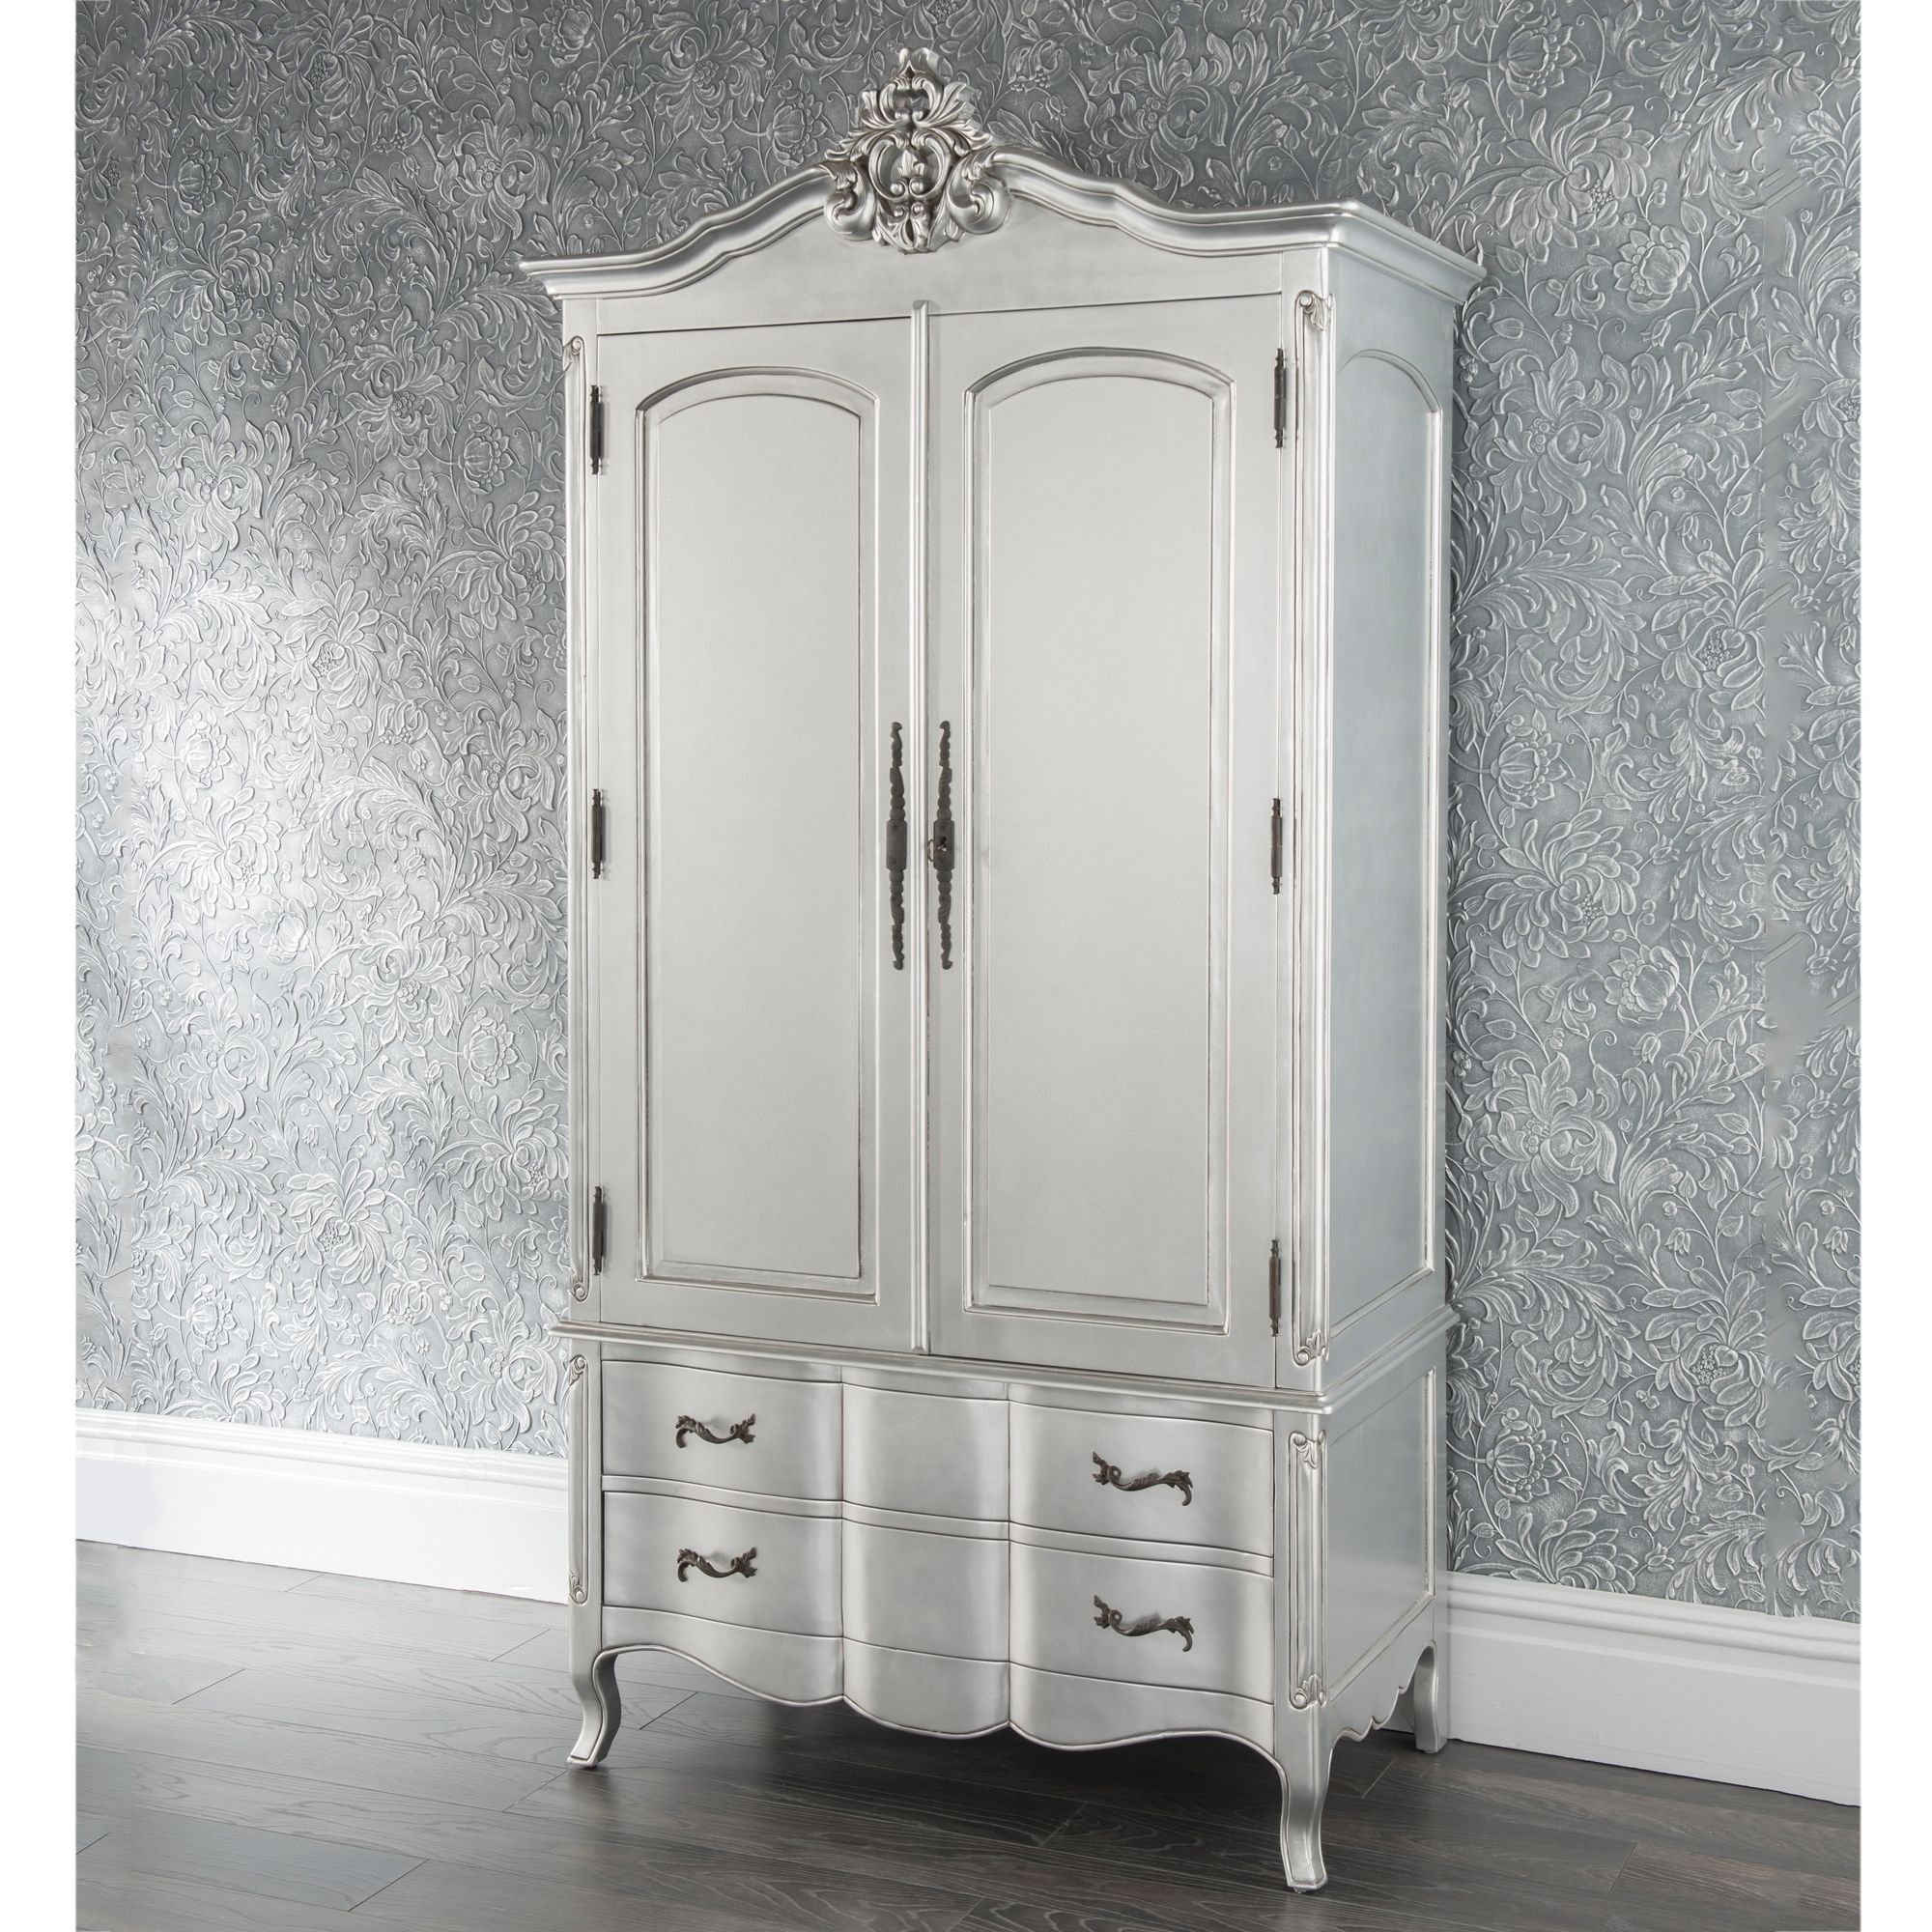 Estelle Antique French Style Wardrobe | French Style Furniture For Silver Wardrobes (View 3 of 15)